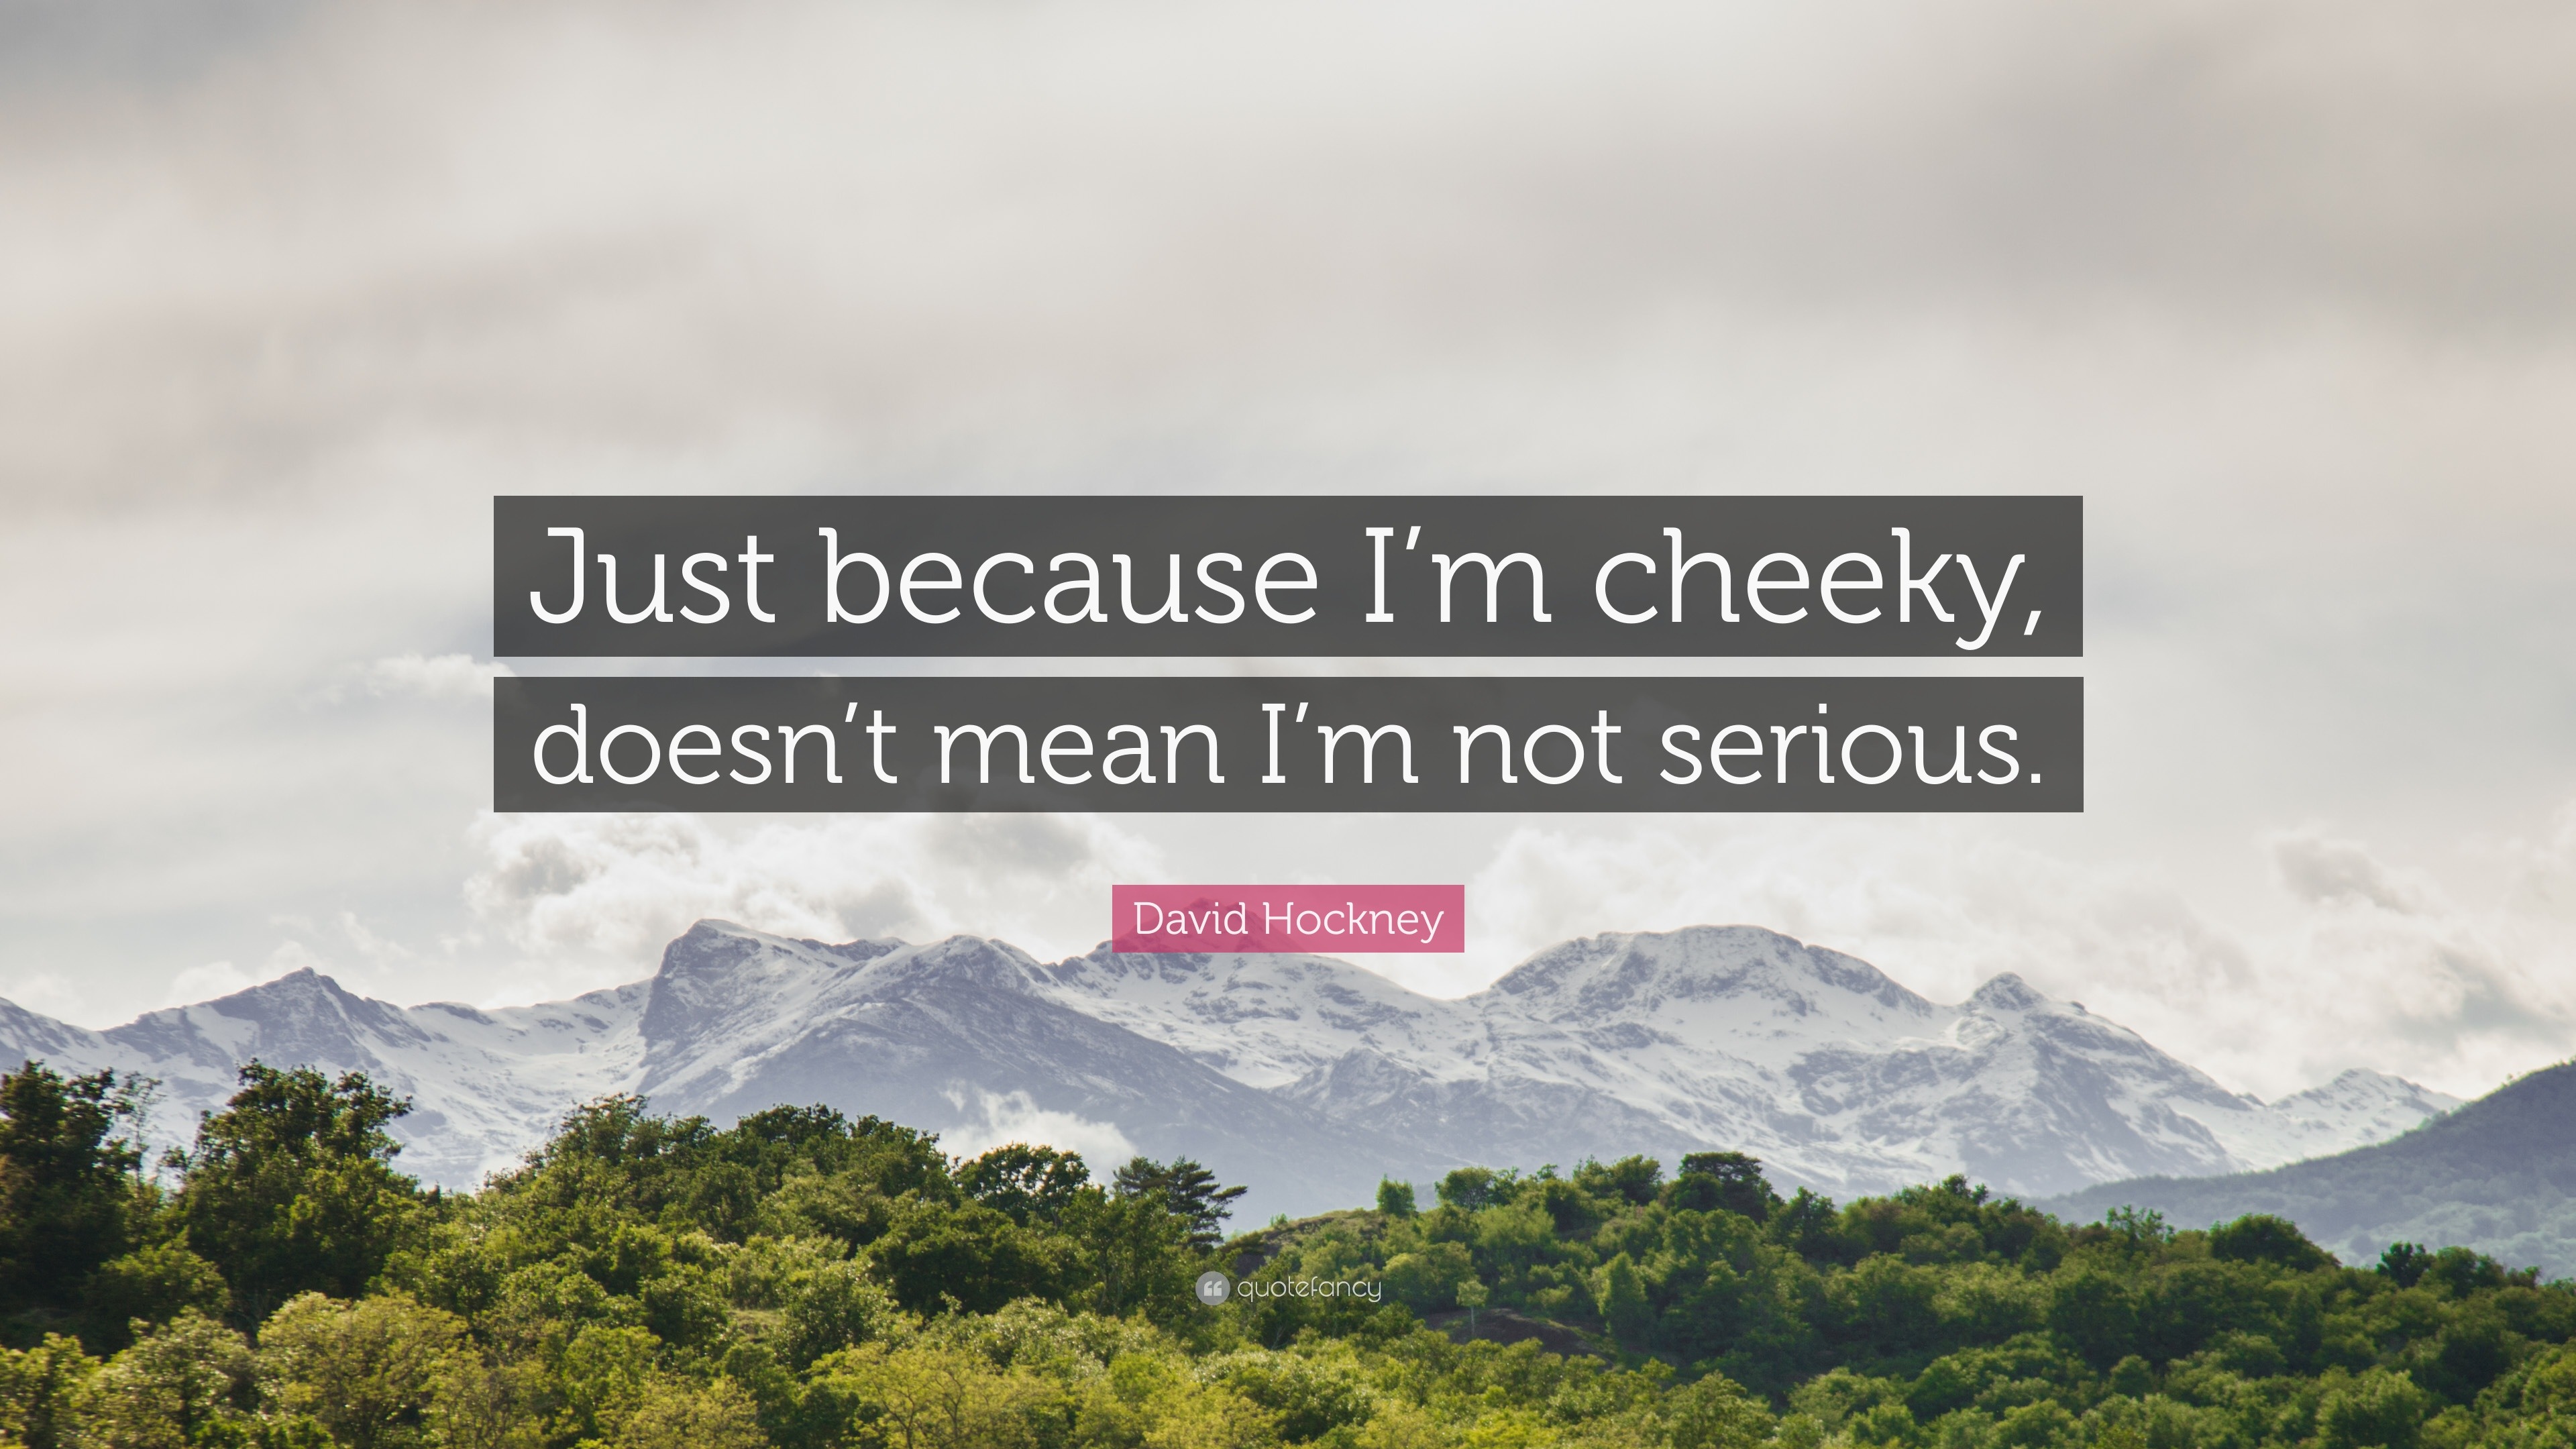 David Hockney quote: Just because I'm cheeky, doesn't mean I'm not serious